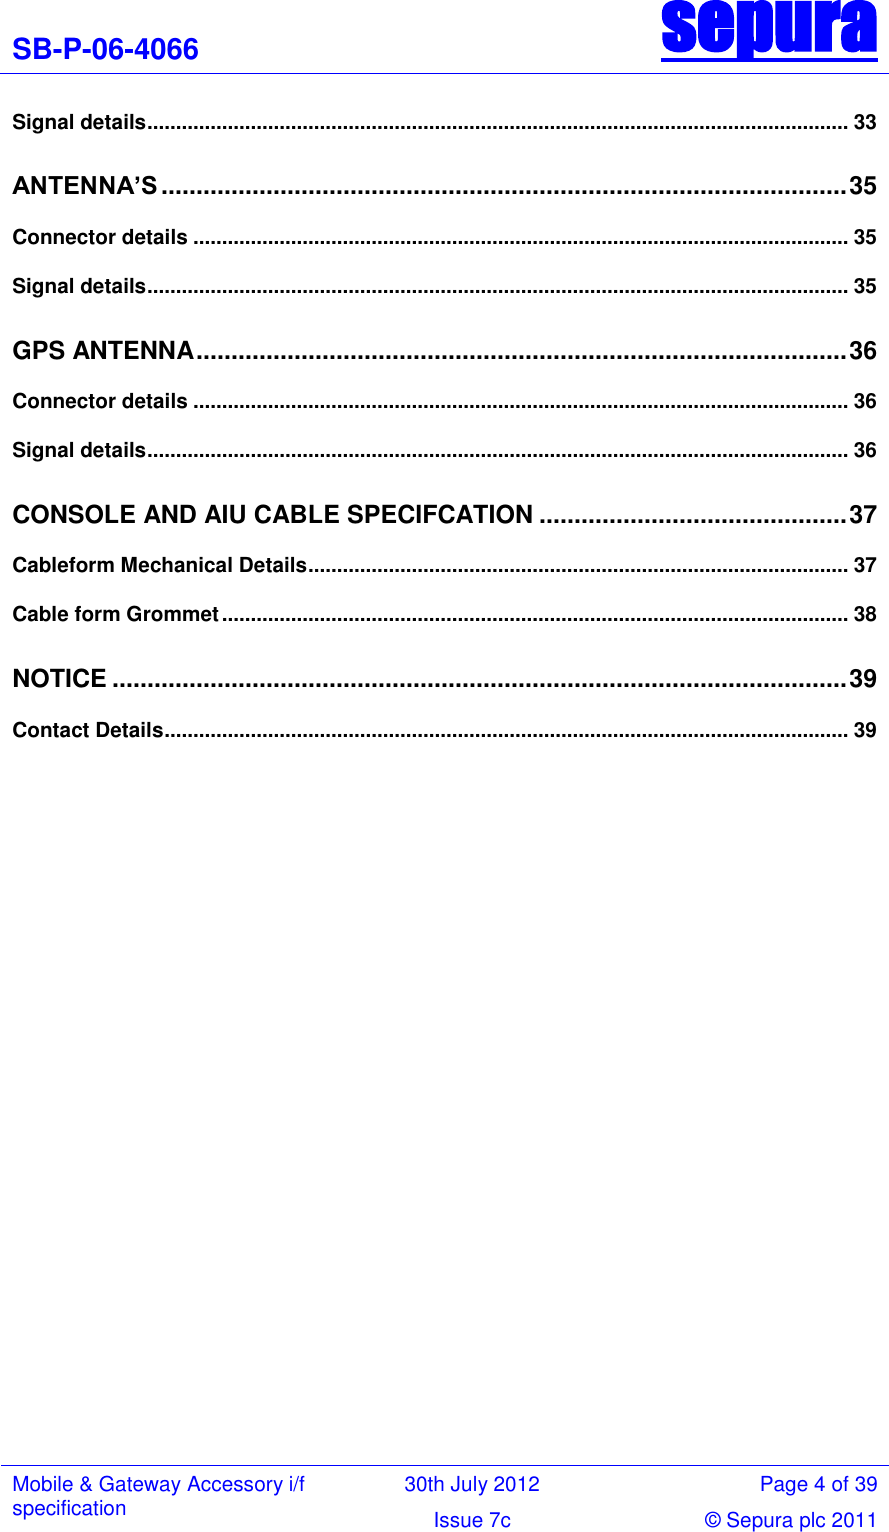 SB-P-06-4066 sepura  Mobile &amp; Gateway Accessory i/f specification 30th July 2012 Page 4 of 39 Issue 7c © Sepura plc 2011   Signal details .......................................................................................................................... 33 ANTENNA’S .................................................................................................. 35 Connector details .................................................................................................................. 35 Signal details .......................................................................................................................... 35 GPS ANTENNA ............................................................................................. 36 Connector details .................................................................................................................. 36 Signal details .......................................................................................................................... 36 CONSOLE AND AIU CABLE SPECIFCATION ............................................ 37 Cableform Mechanical Details .............................................................................................. 37 Cable form Grommet ............................................................................................................. 38 NOTICE ......................................................................................................... 39 Contact Details ....................................................................................................................... 39  